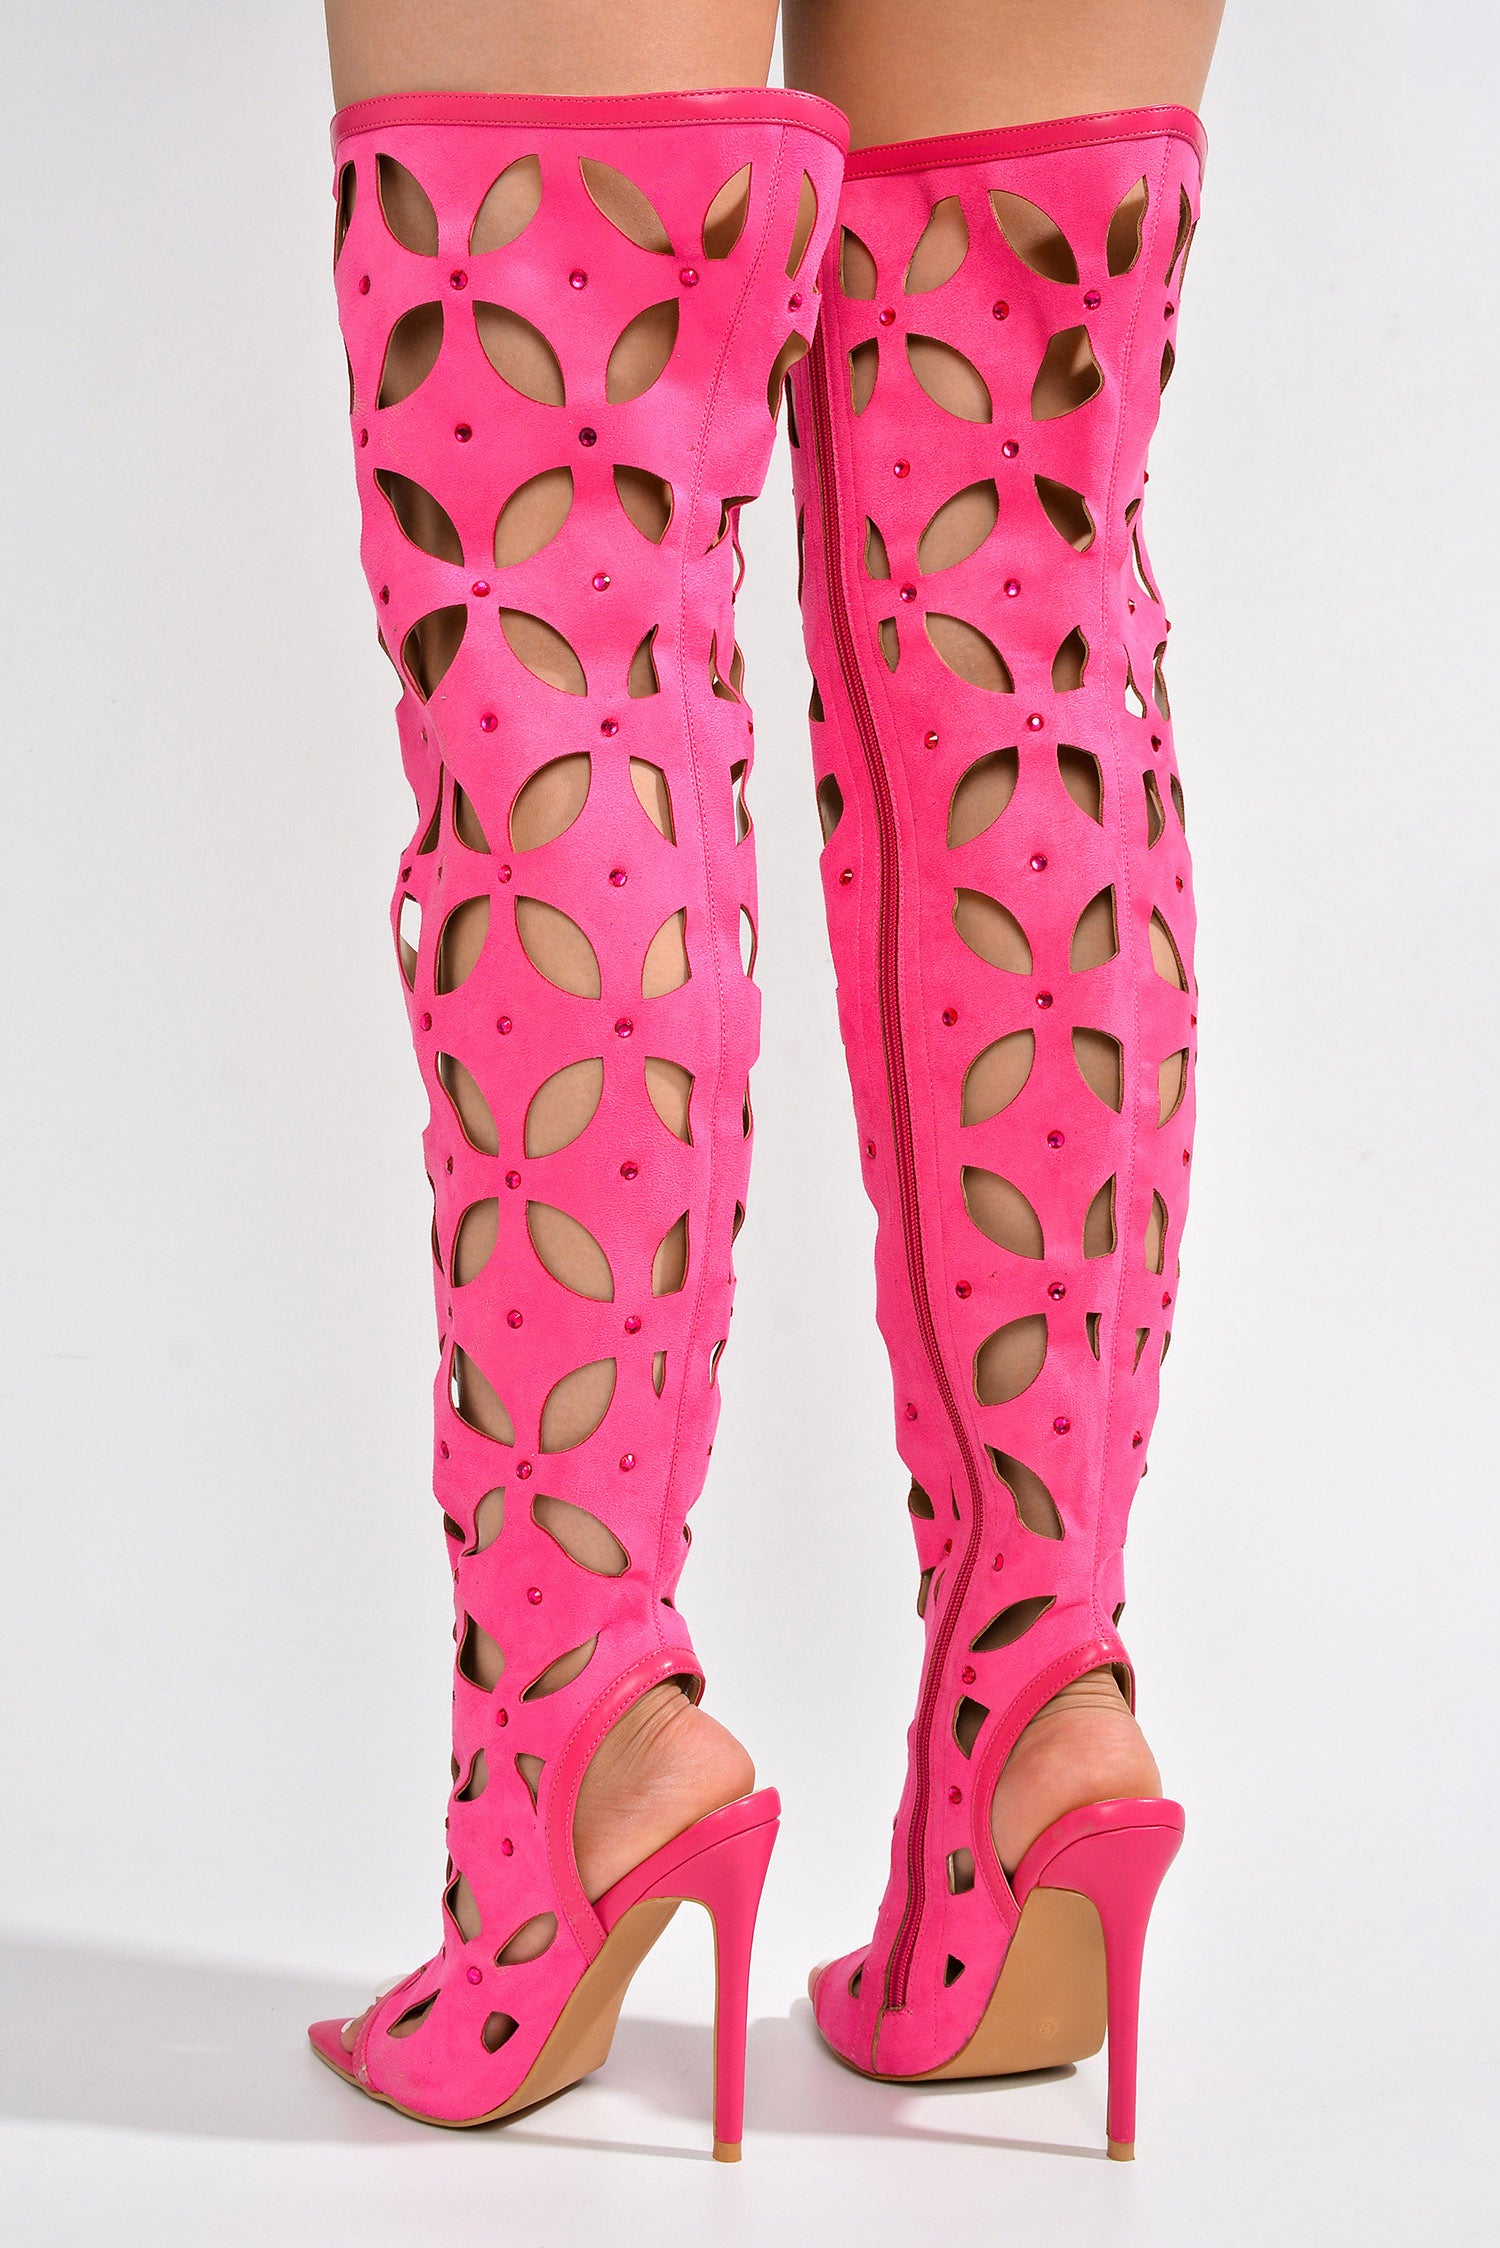 Cape Robbin - DIANA - PINK - BOOTS